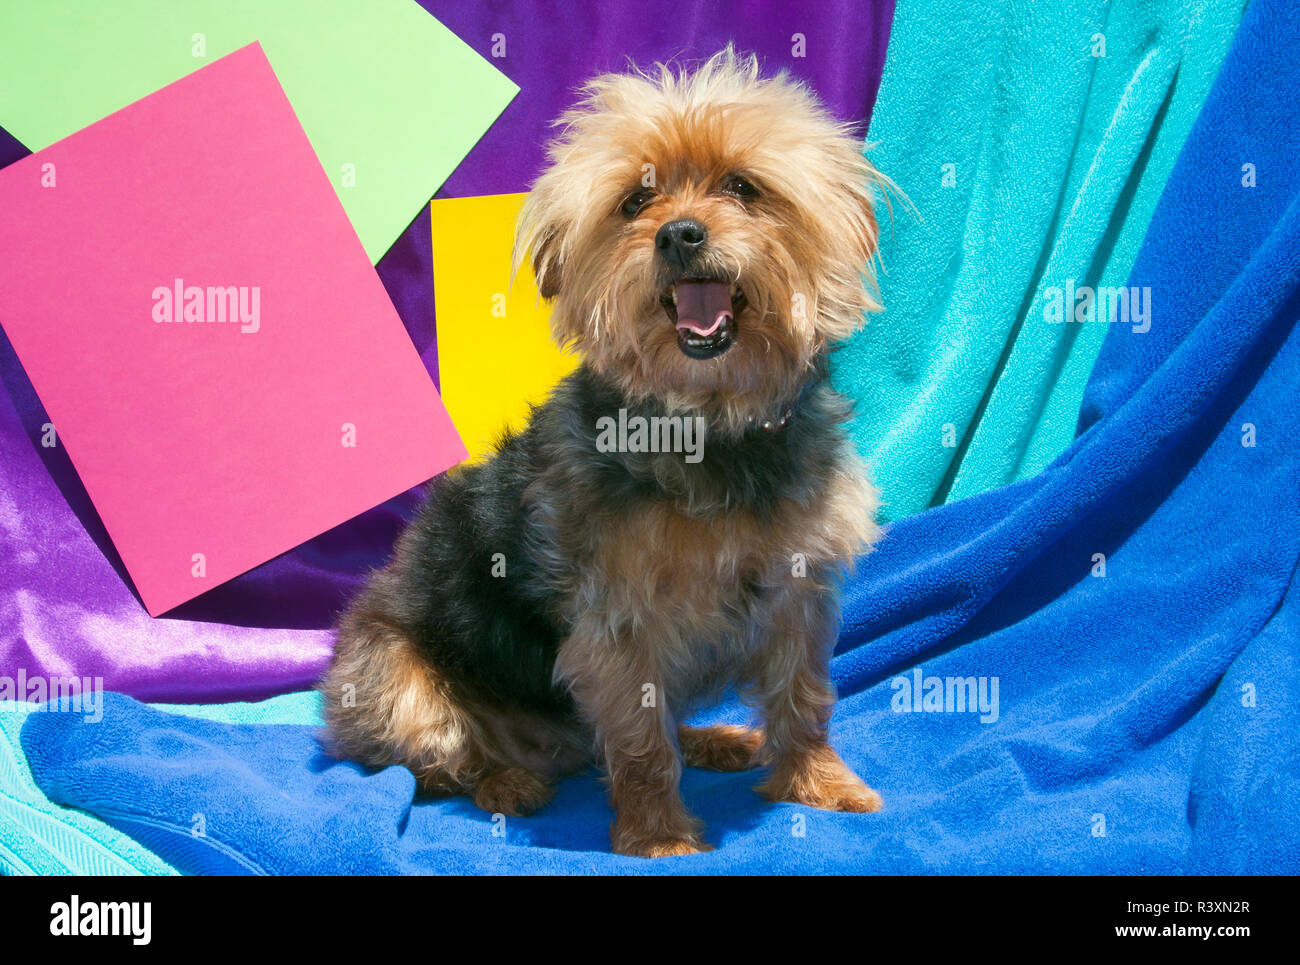 Yorkshire Terrier with colorful background Stock Photo